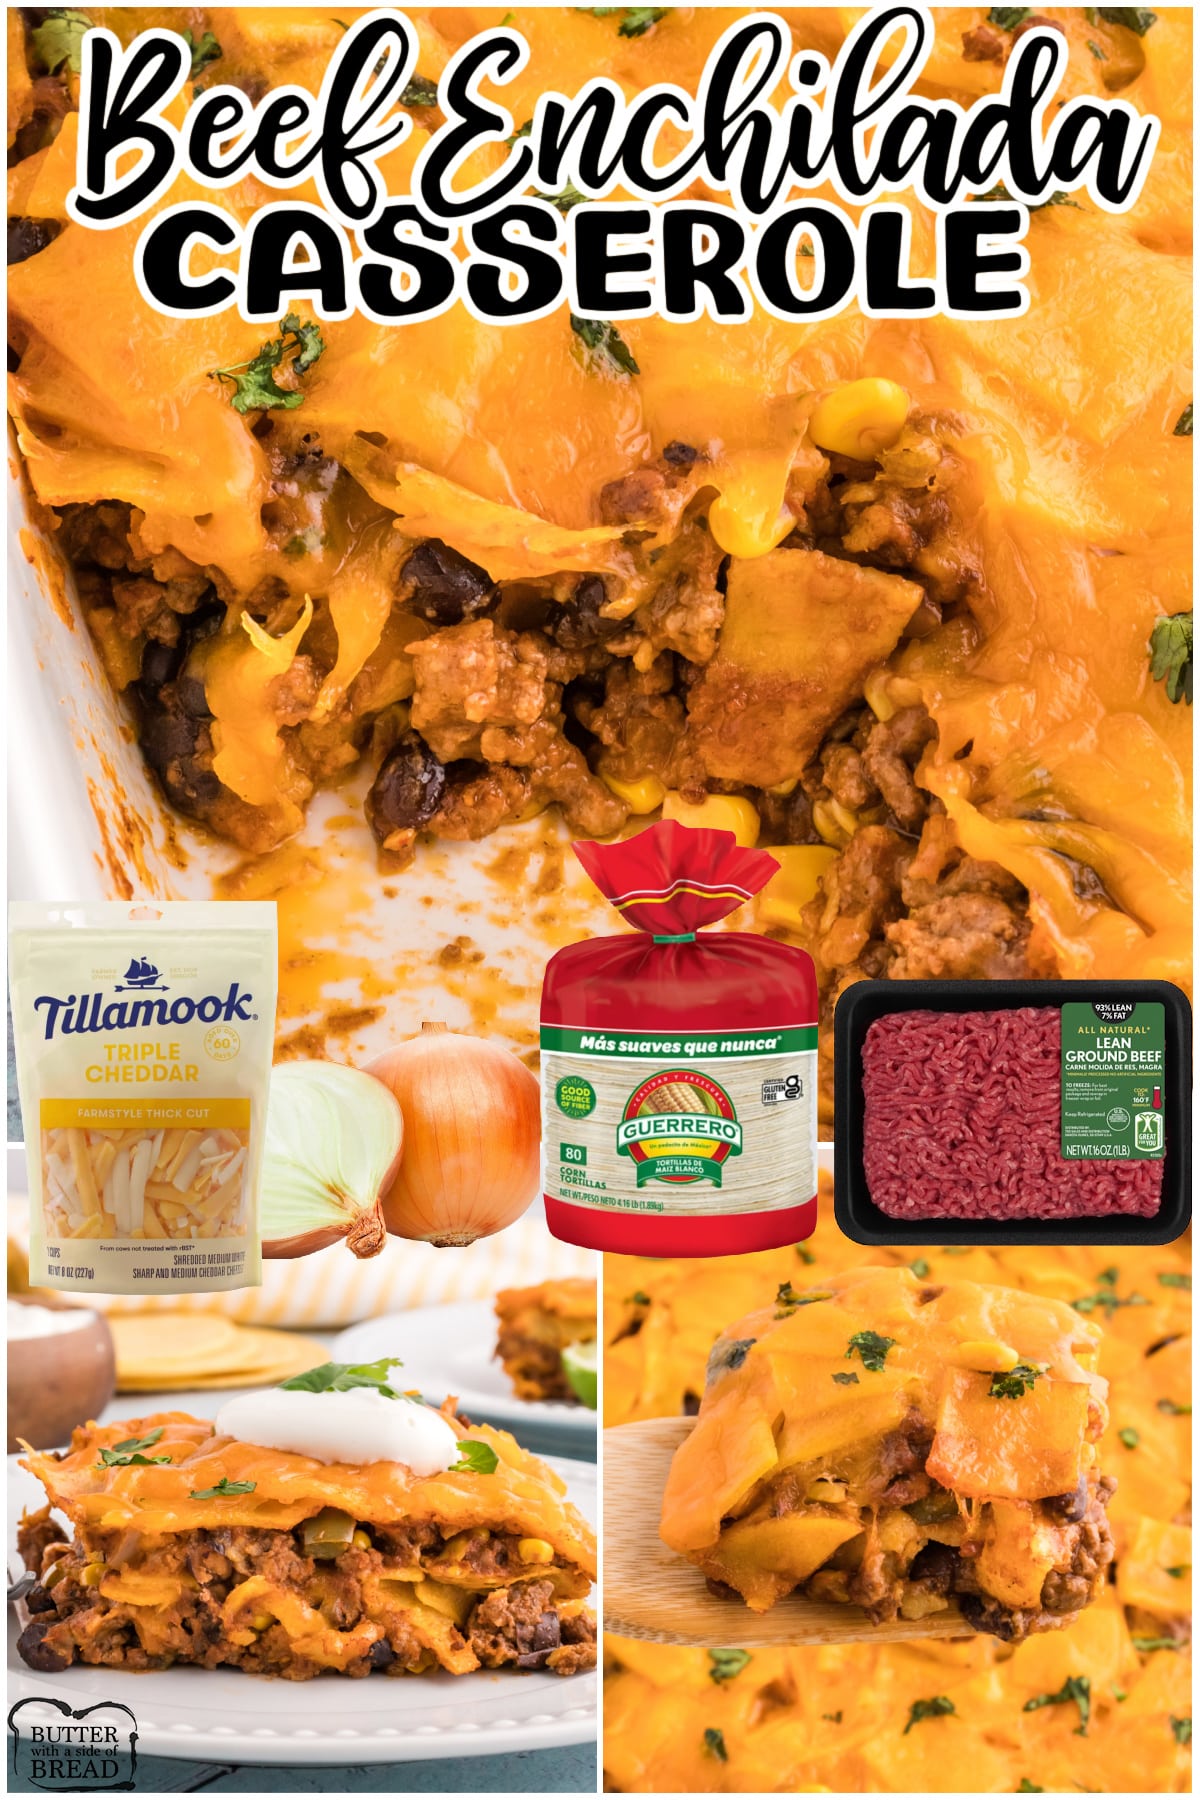 Beef Enchilada Casserole is a delicious and hearty dish that is loaded with ground beef, corn, black beans, and enchilada sauce, all layered with corn tortillas and cheddar cheese. This casserole is a perfect meal for any weeknight dinner or special occasion.